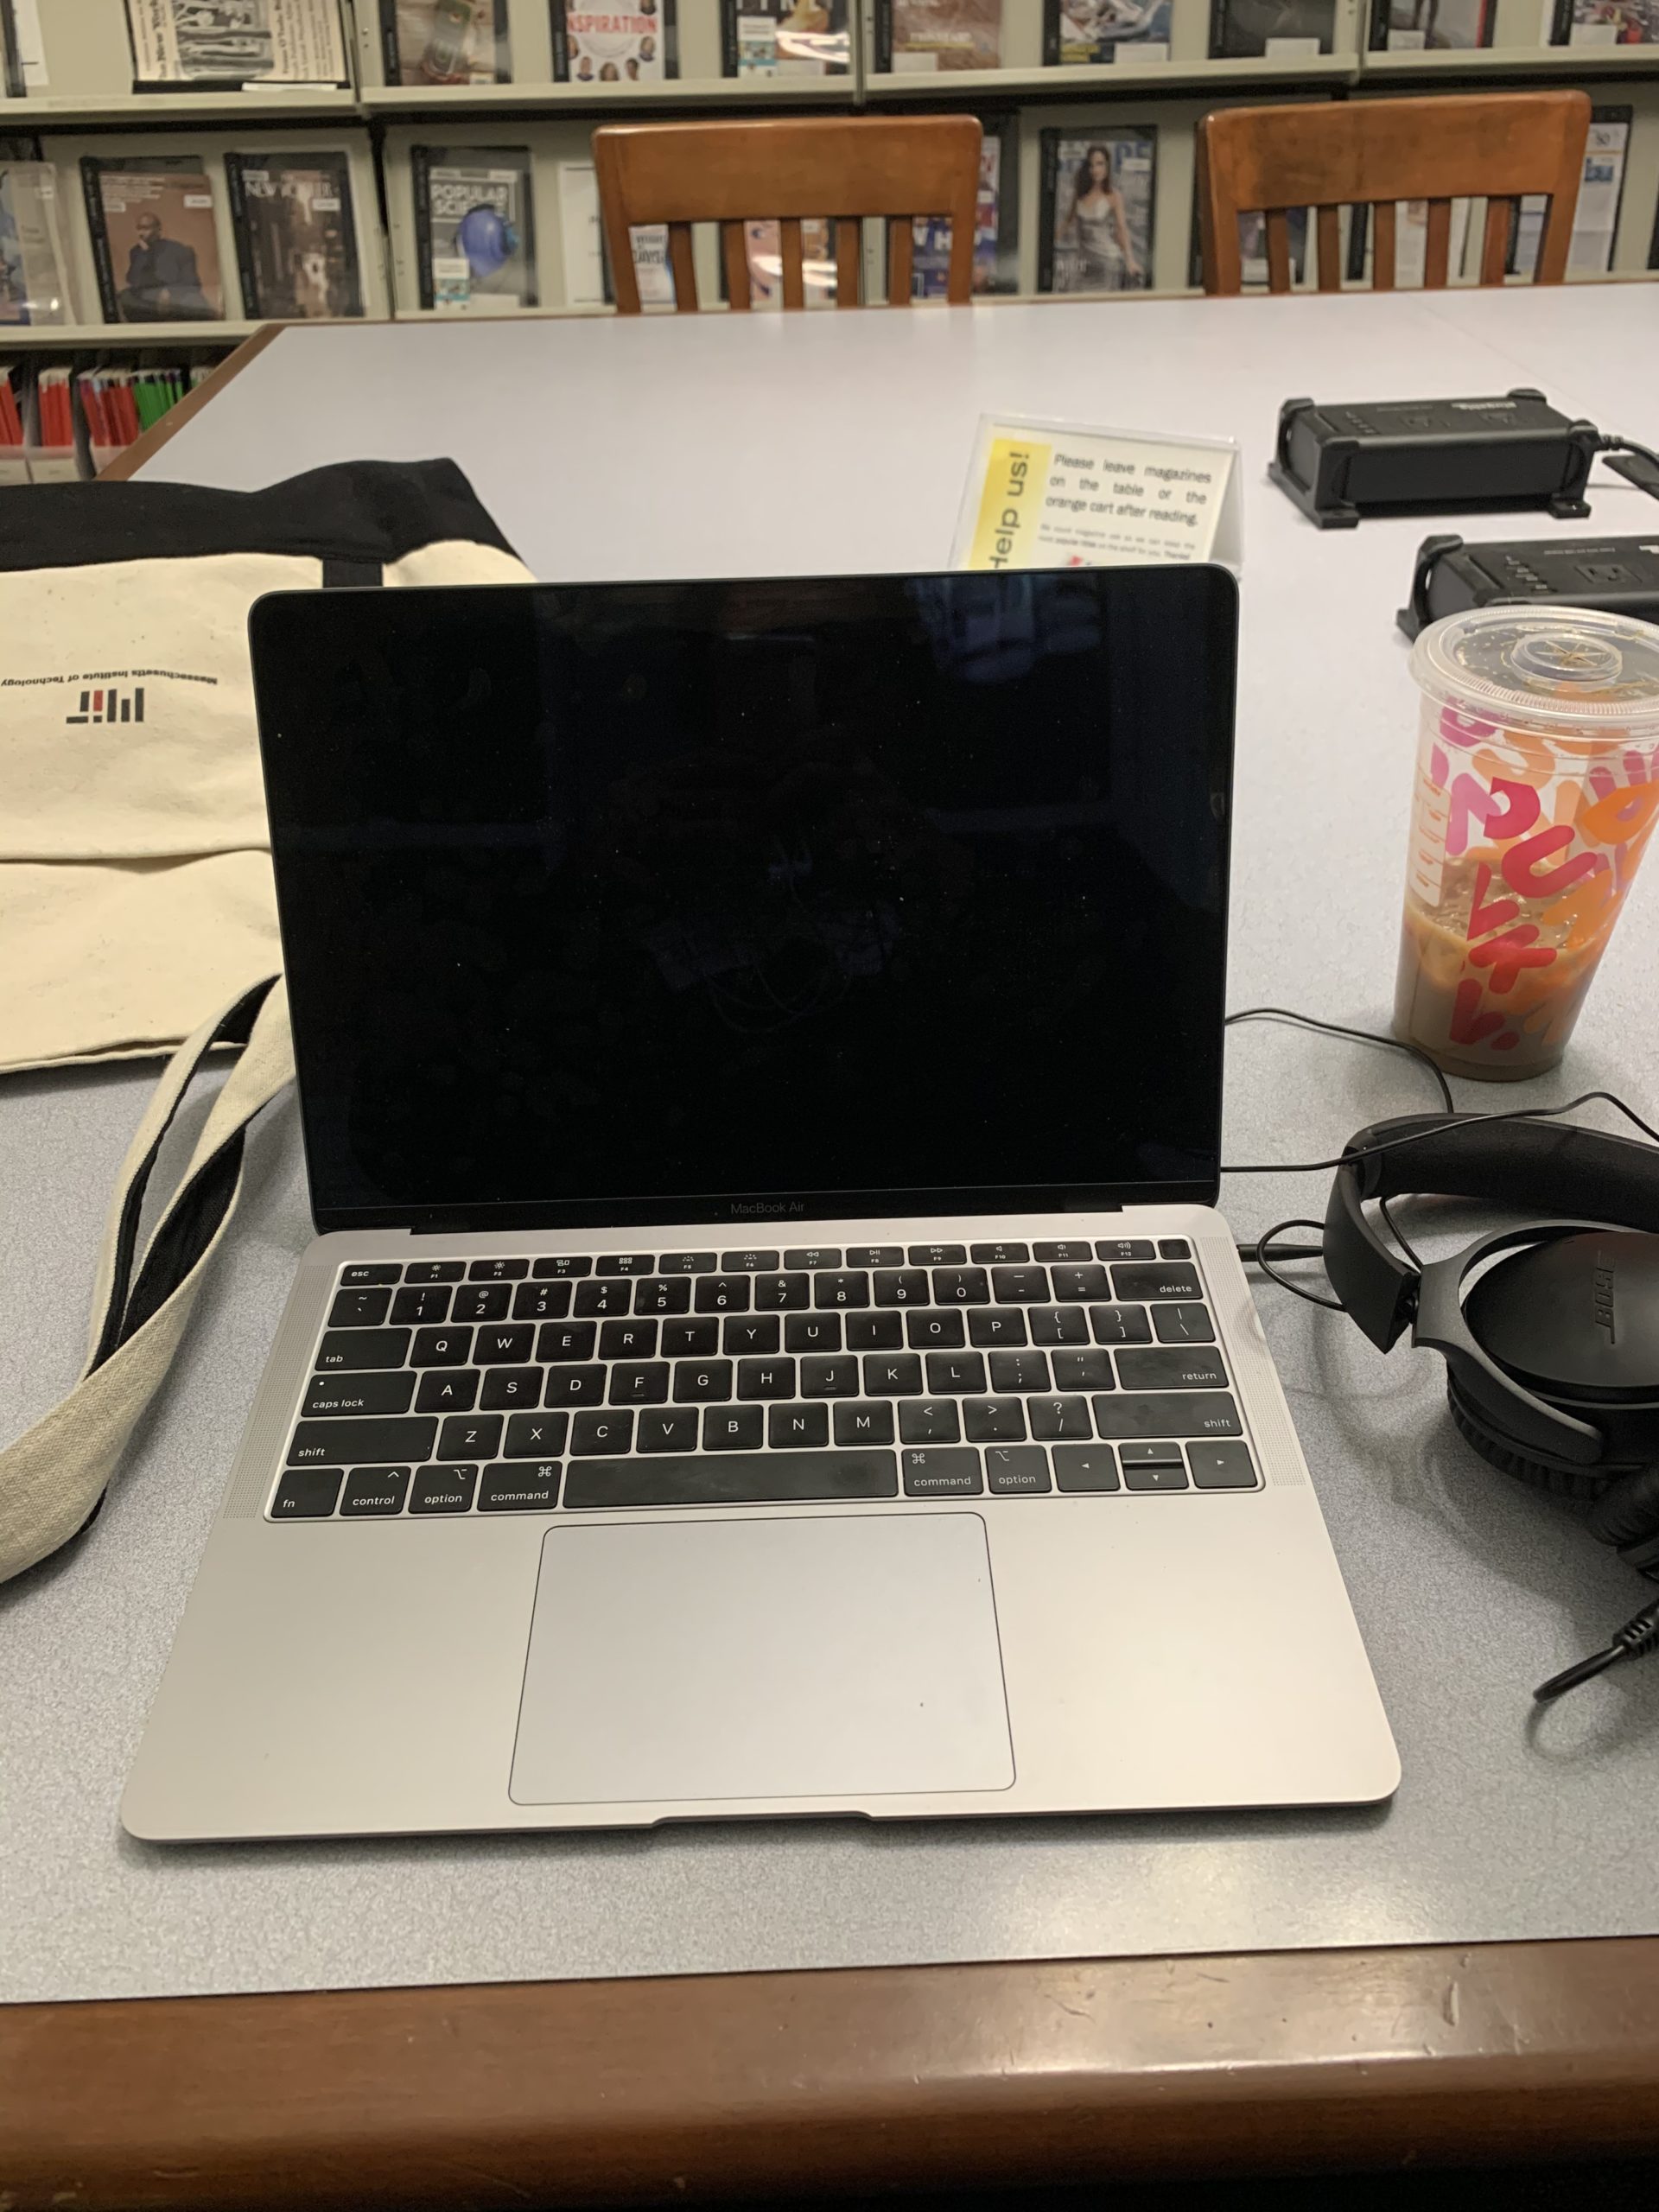 Tiffany's laptop and Dunkin' Doughnuts cup at a library table